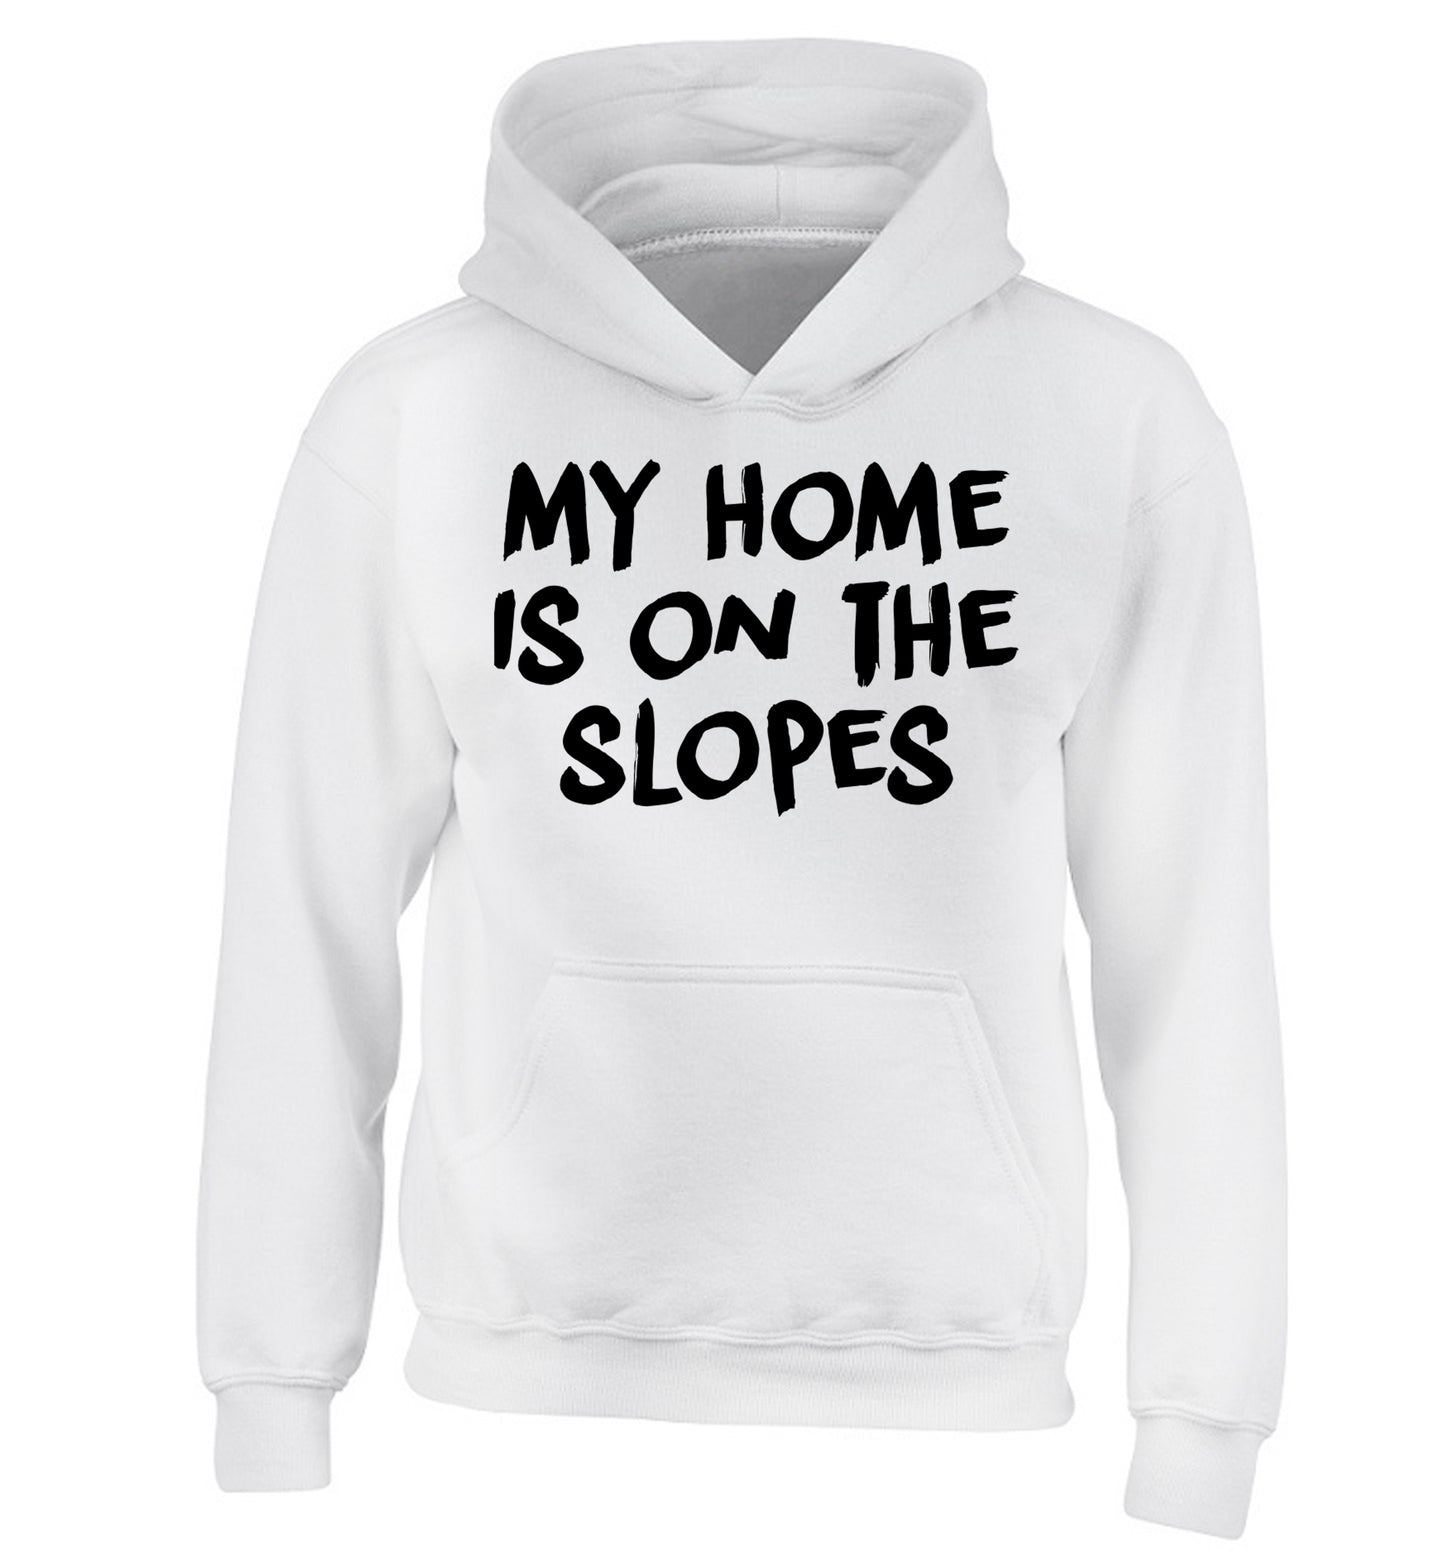 My home is on the slopes children's white hoodie 12-14 Years